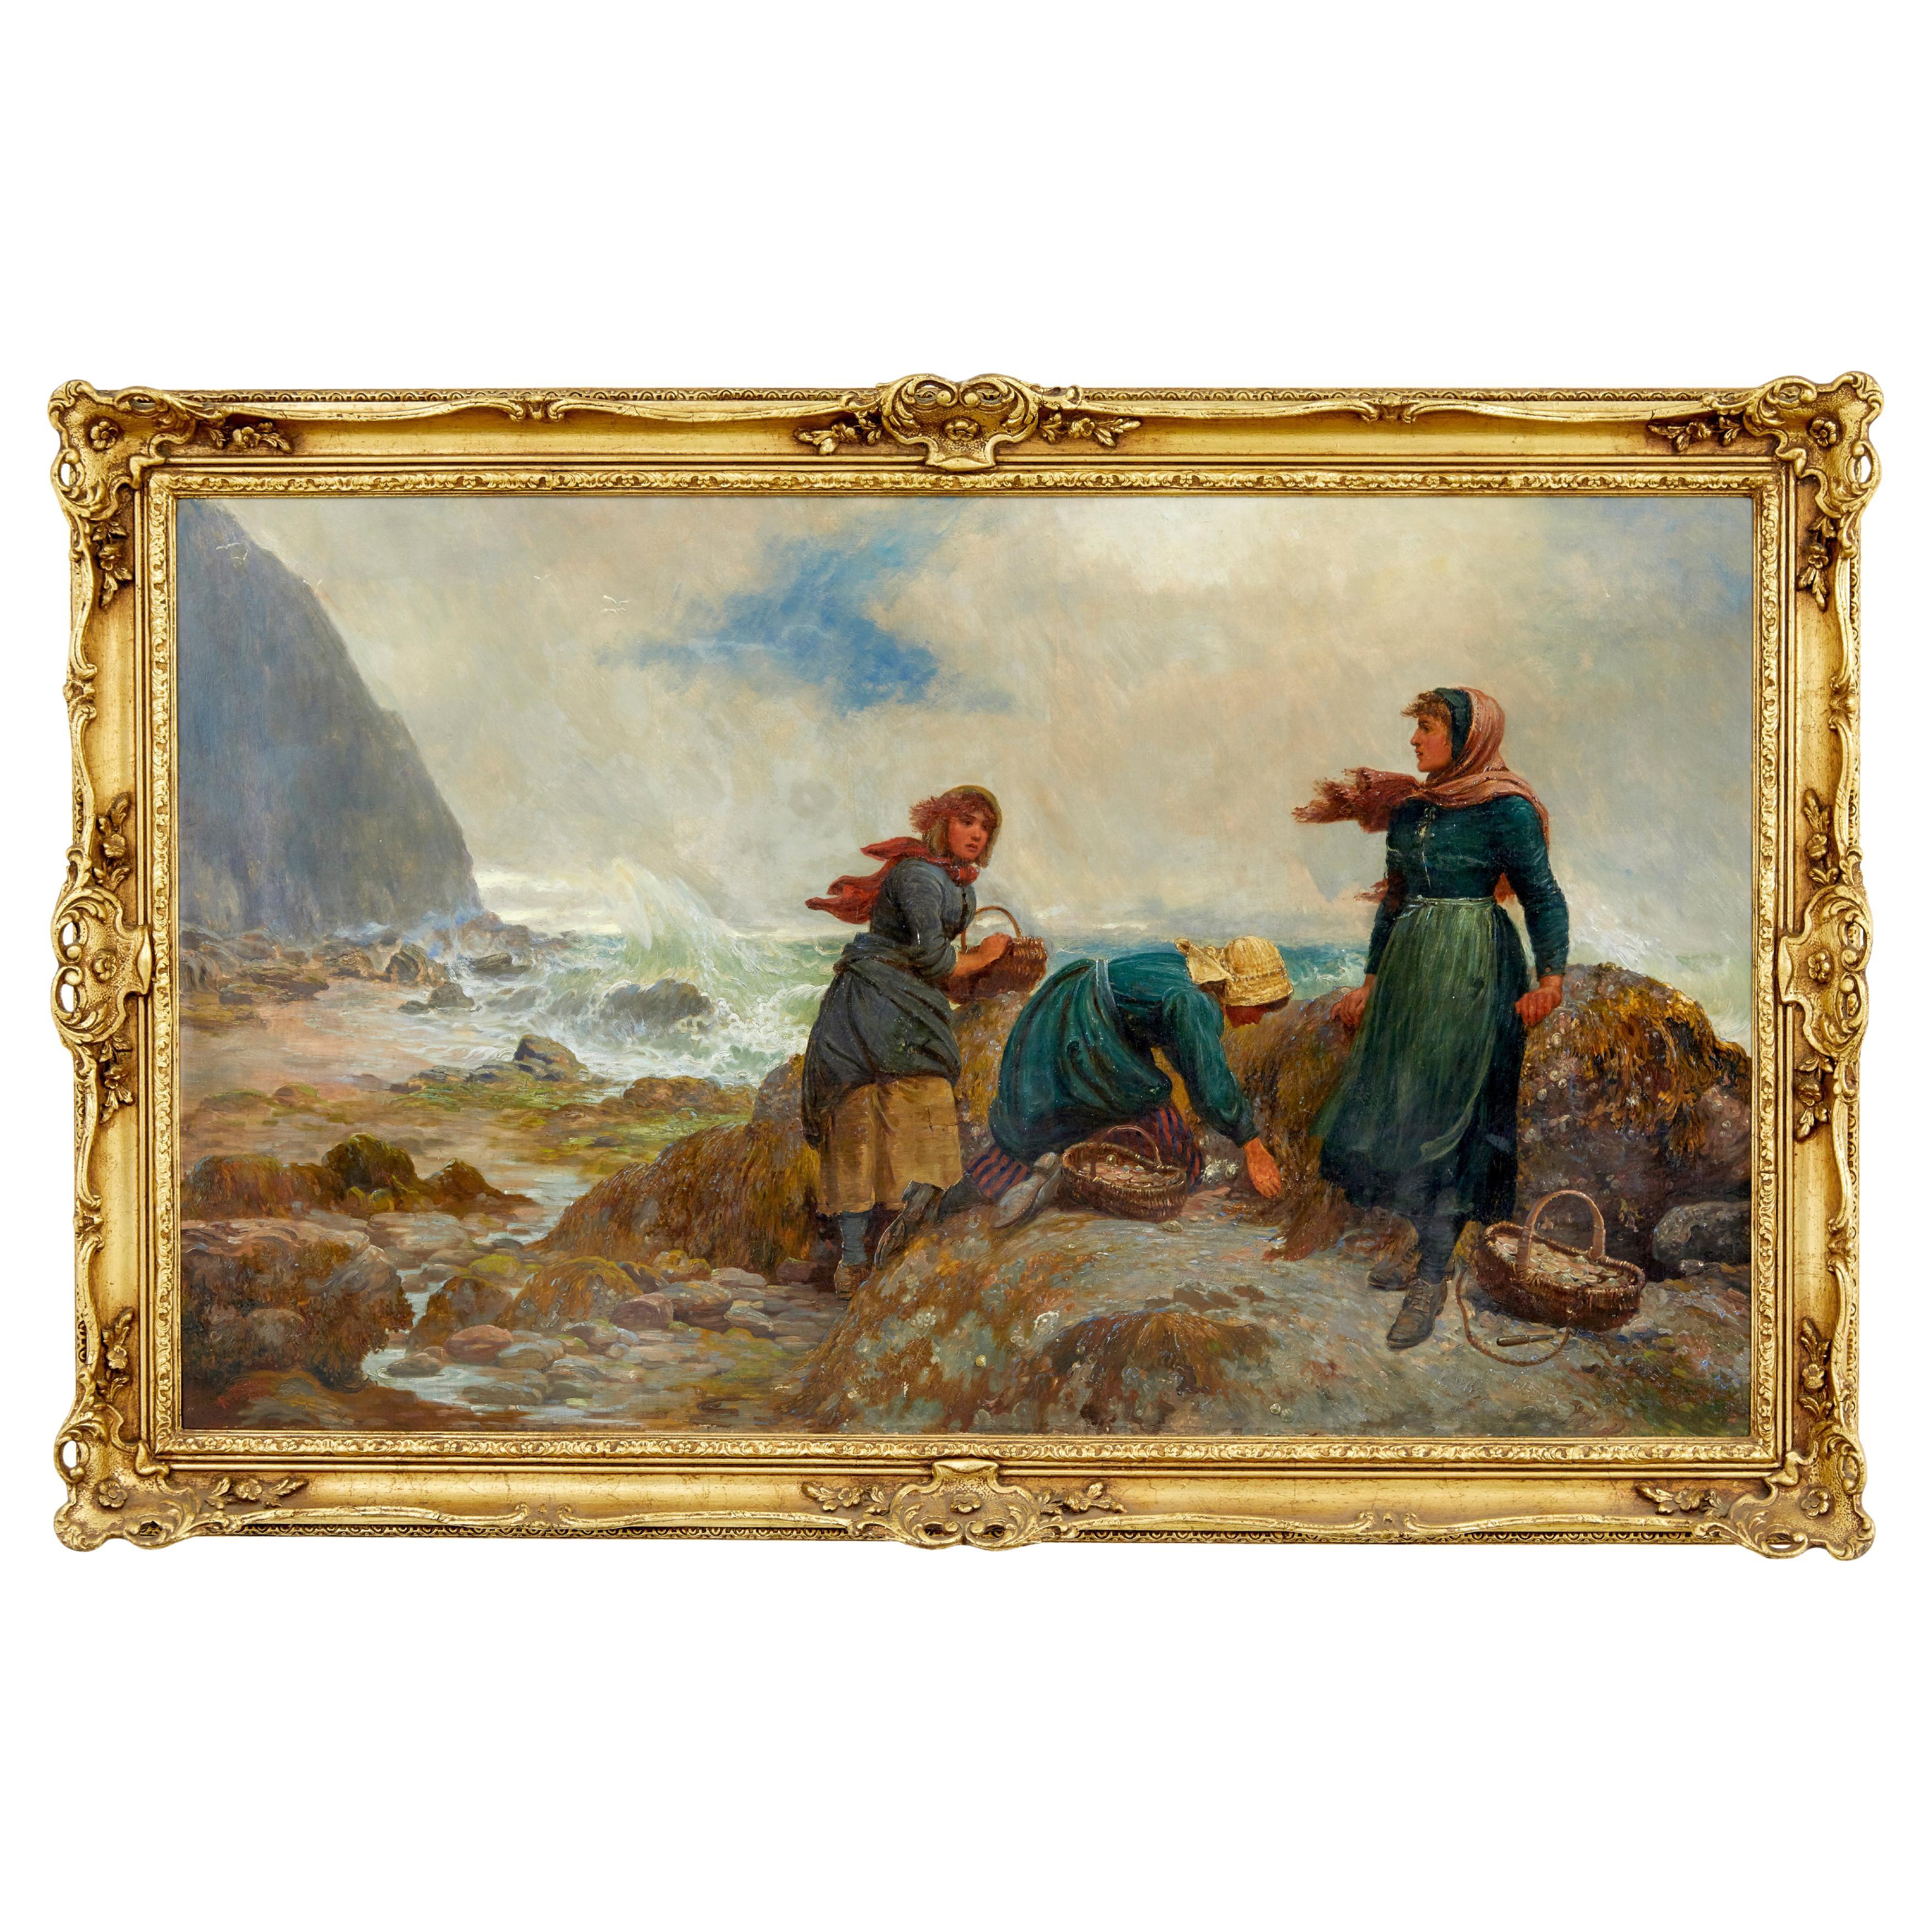 19th century oil painting of yorkshire flither pickers by Robert Farren